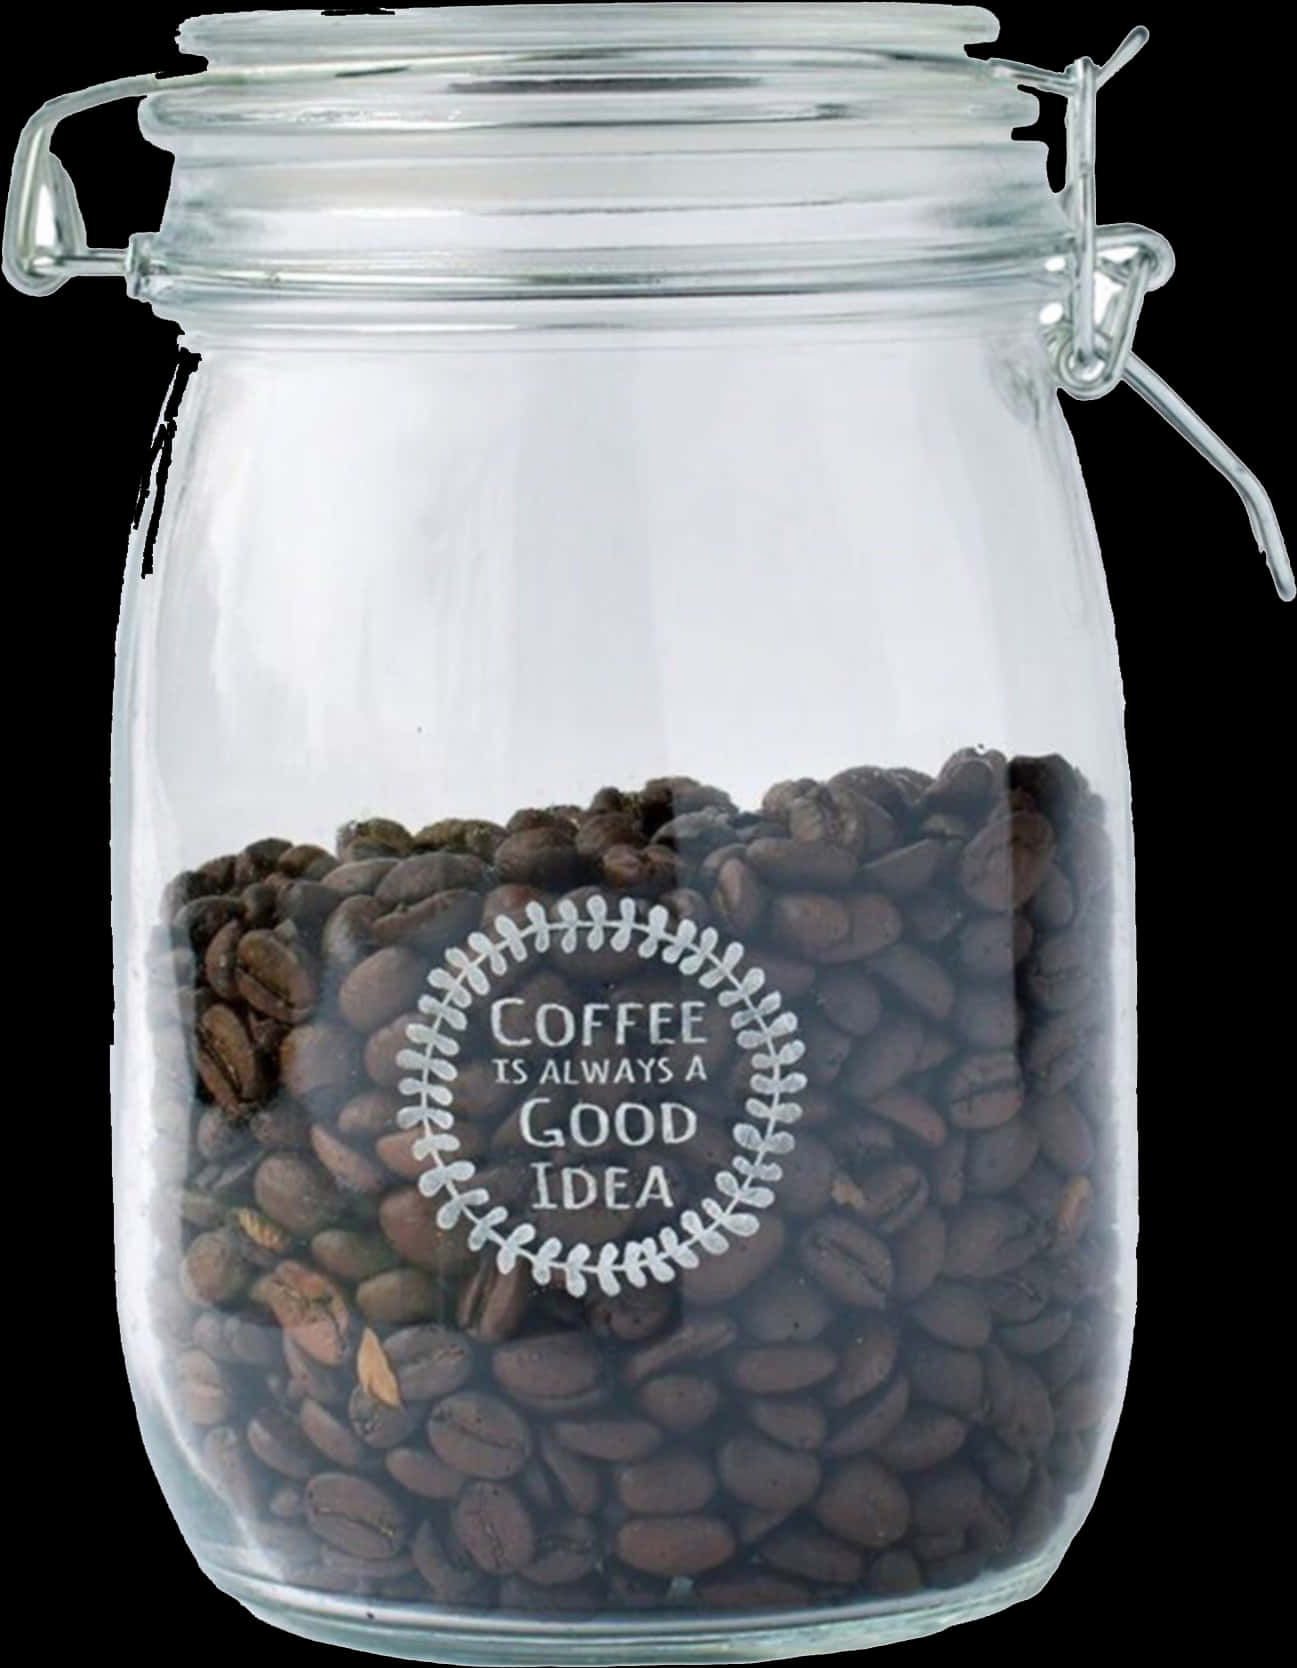 A Glass Jar With Coffee Beans Inside